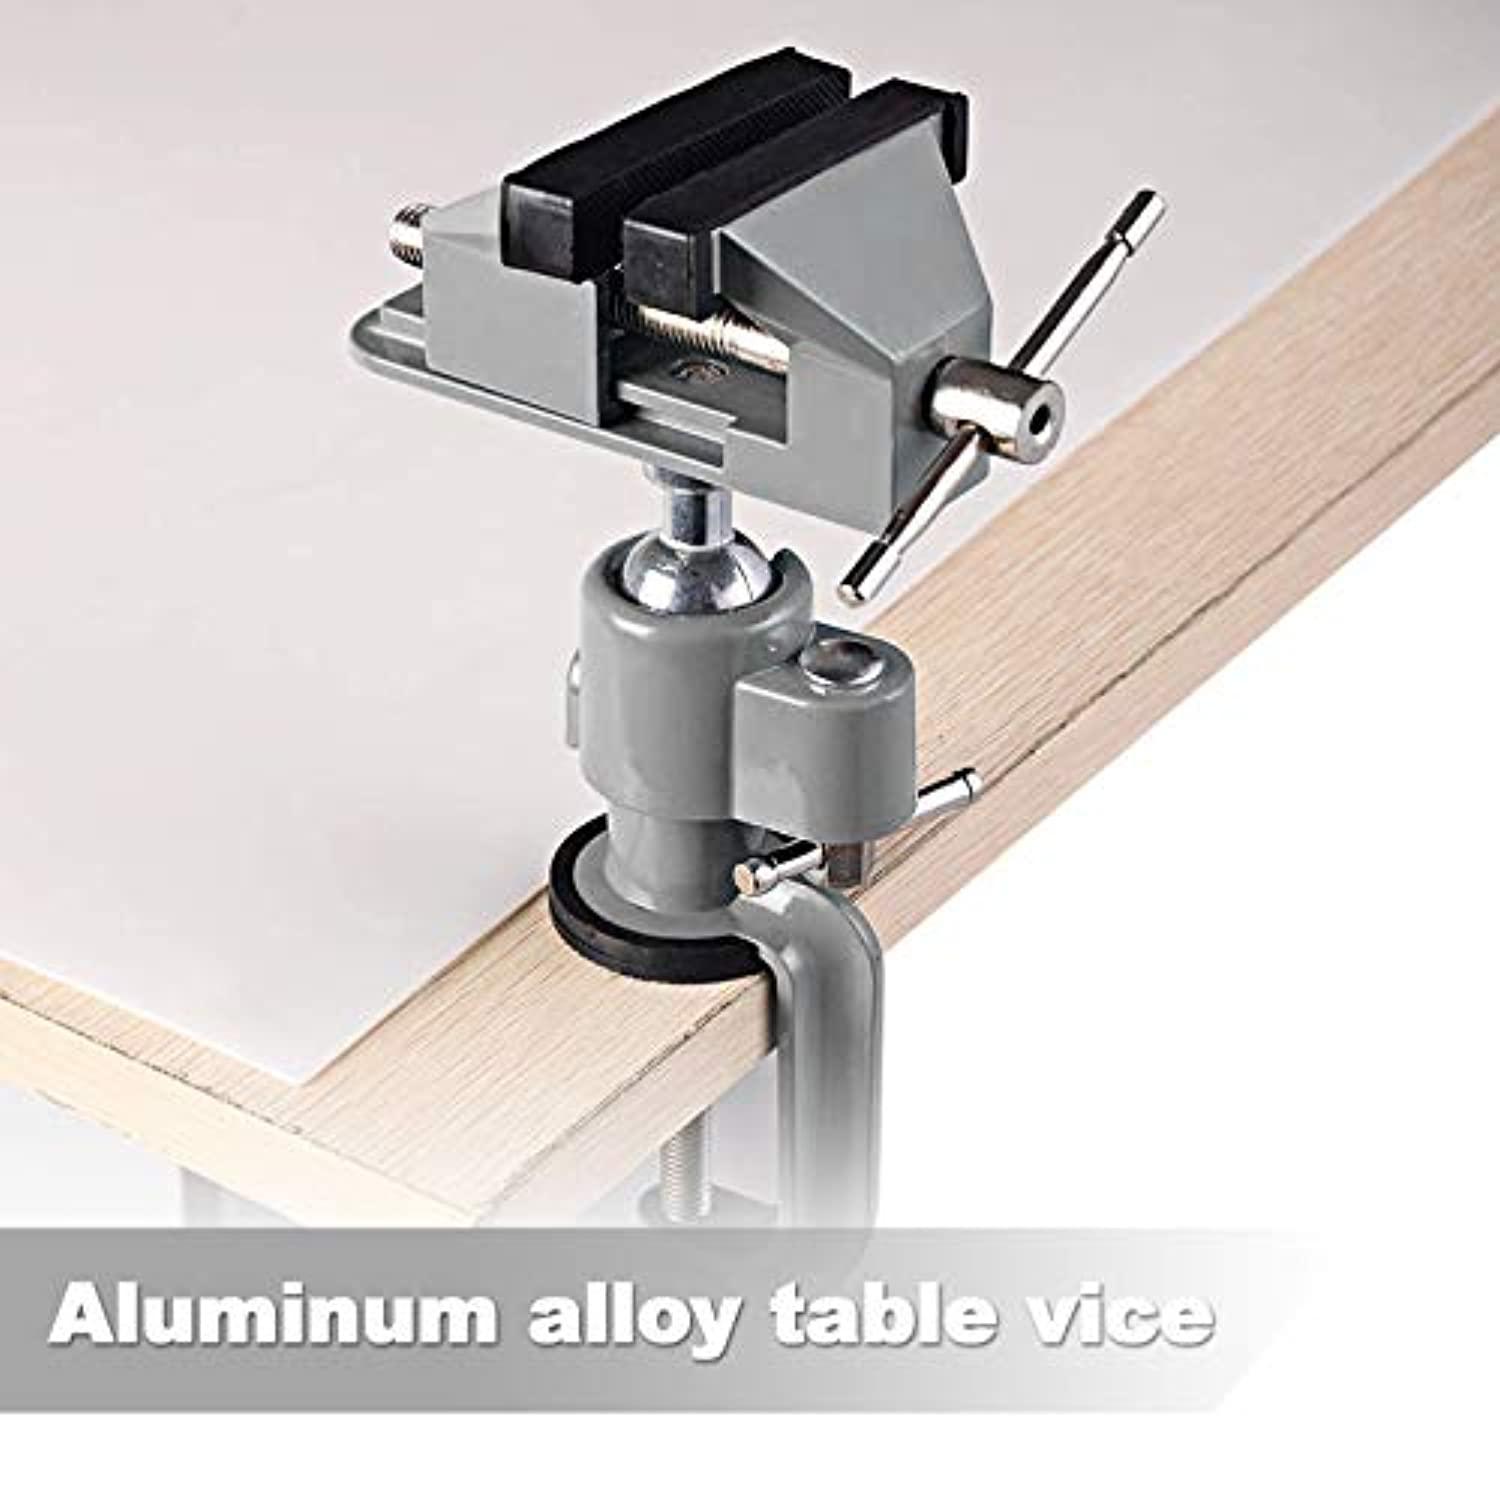 Micro Traders 360universal vice aluminum alloy mini table clamp bench vise 70mm rubber jaws diy craft tool for modelling painting gluing so